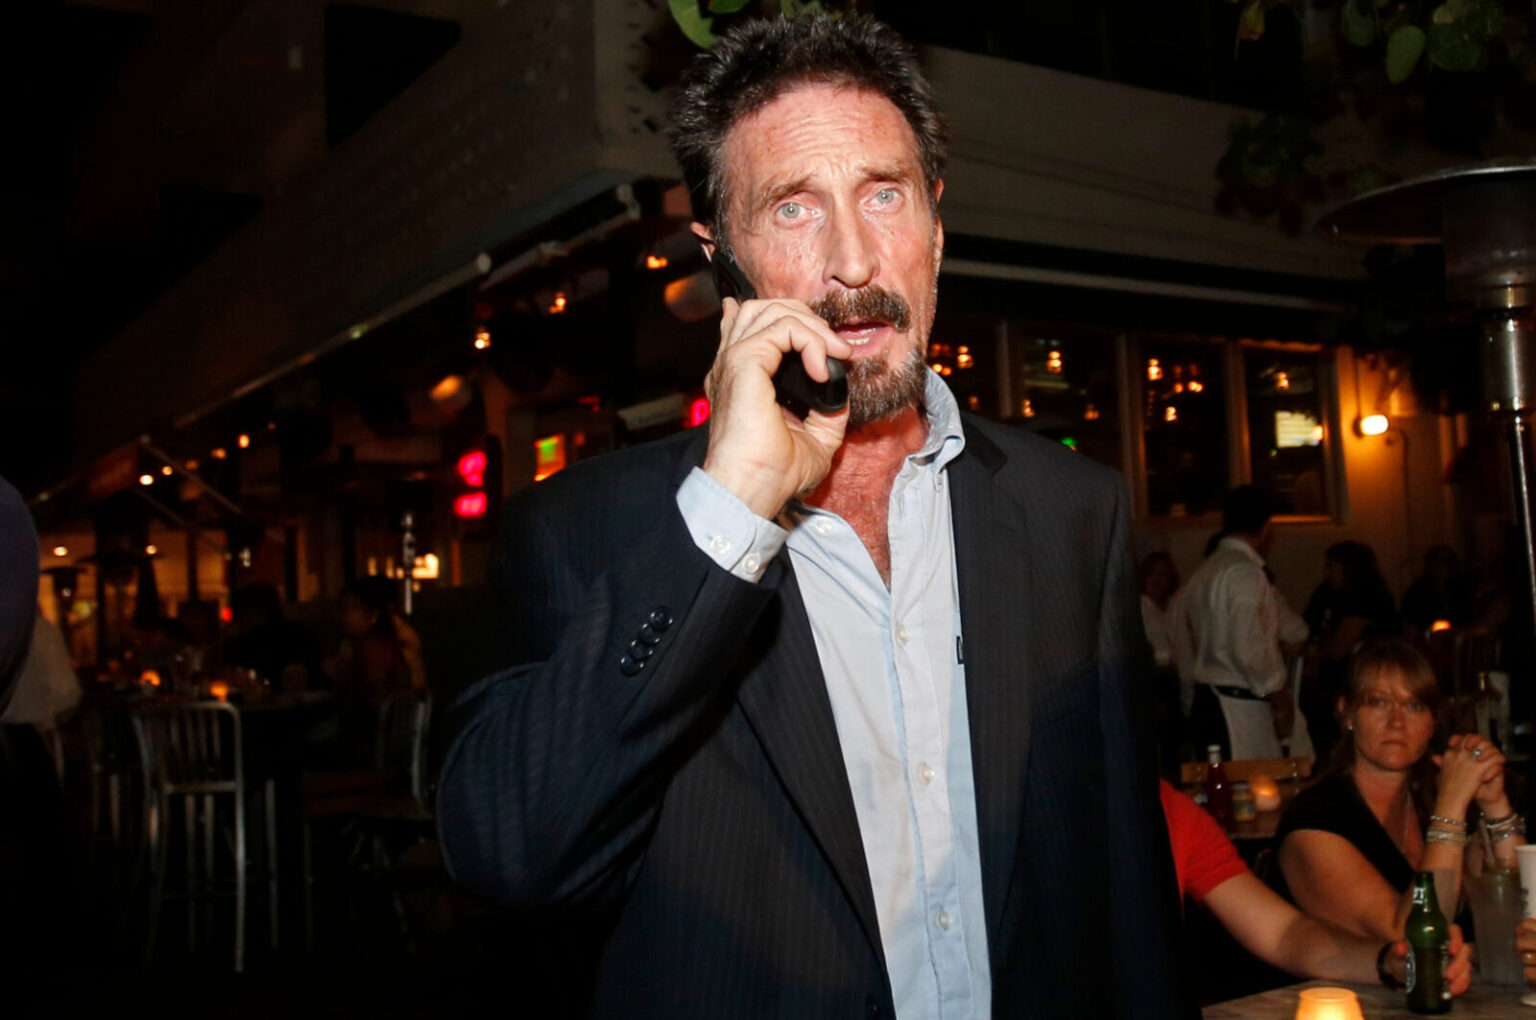 Cybersecurity system founder John McAfee died of an apparent suicide in his cell. Dive into why conspiracy theorists are saying he was really murdered.